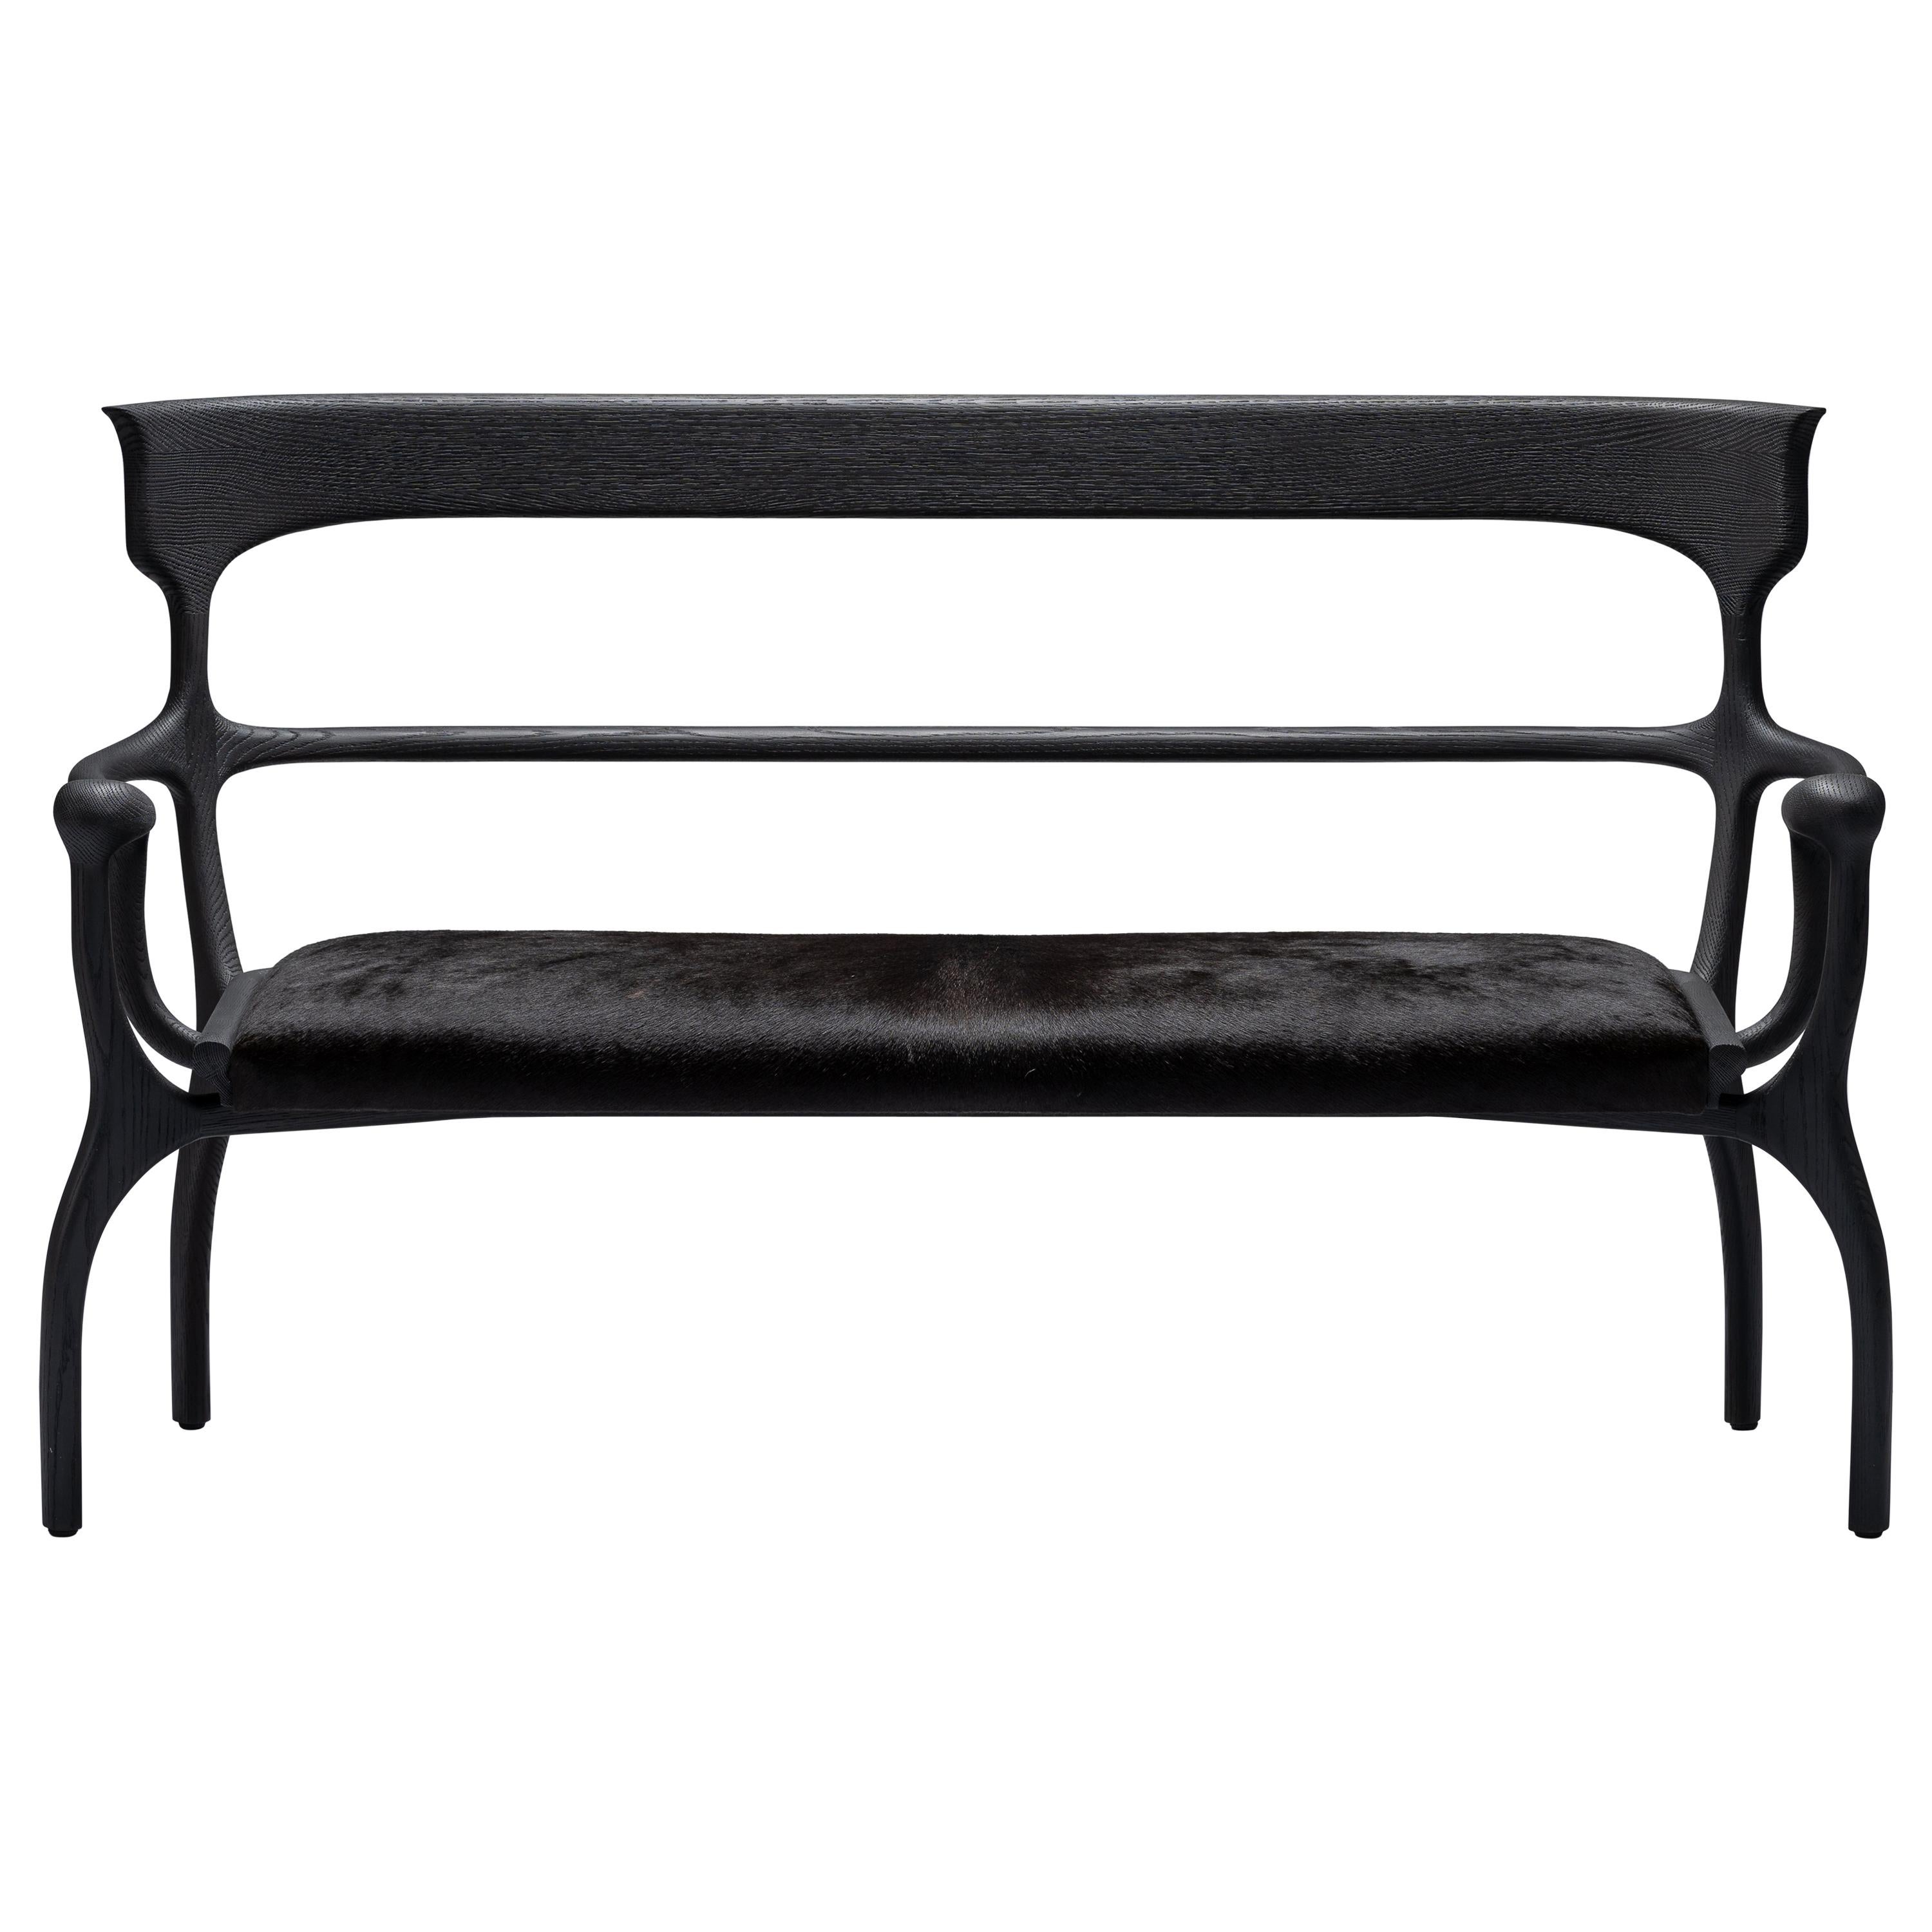 Marta Black Settee/Bench in Walnut/Oak with Leather/Cowhide Seat by Mandy Graham